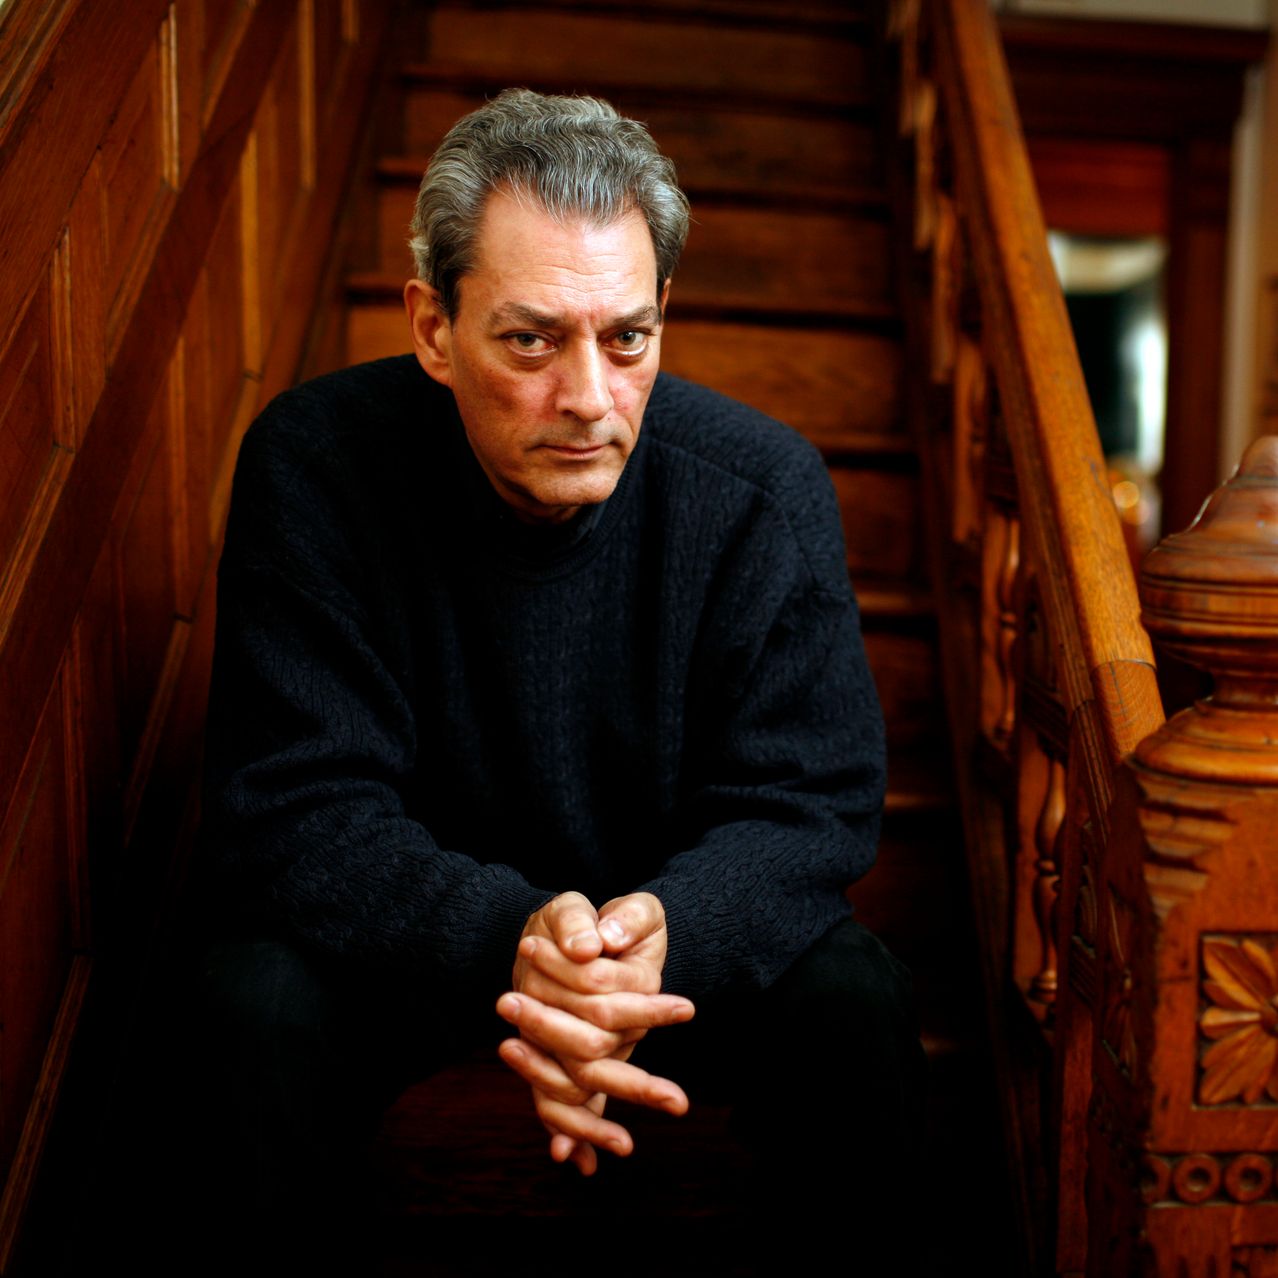 Paul Auster, Prolific American Writer and Filmmaker, Dies at 77